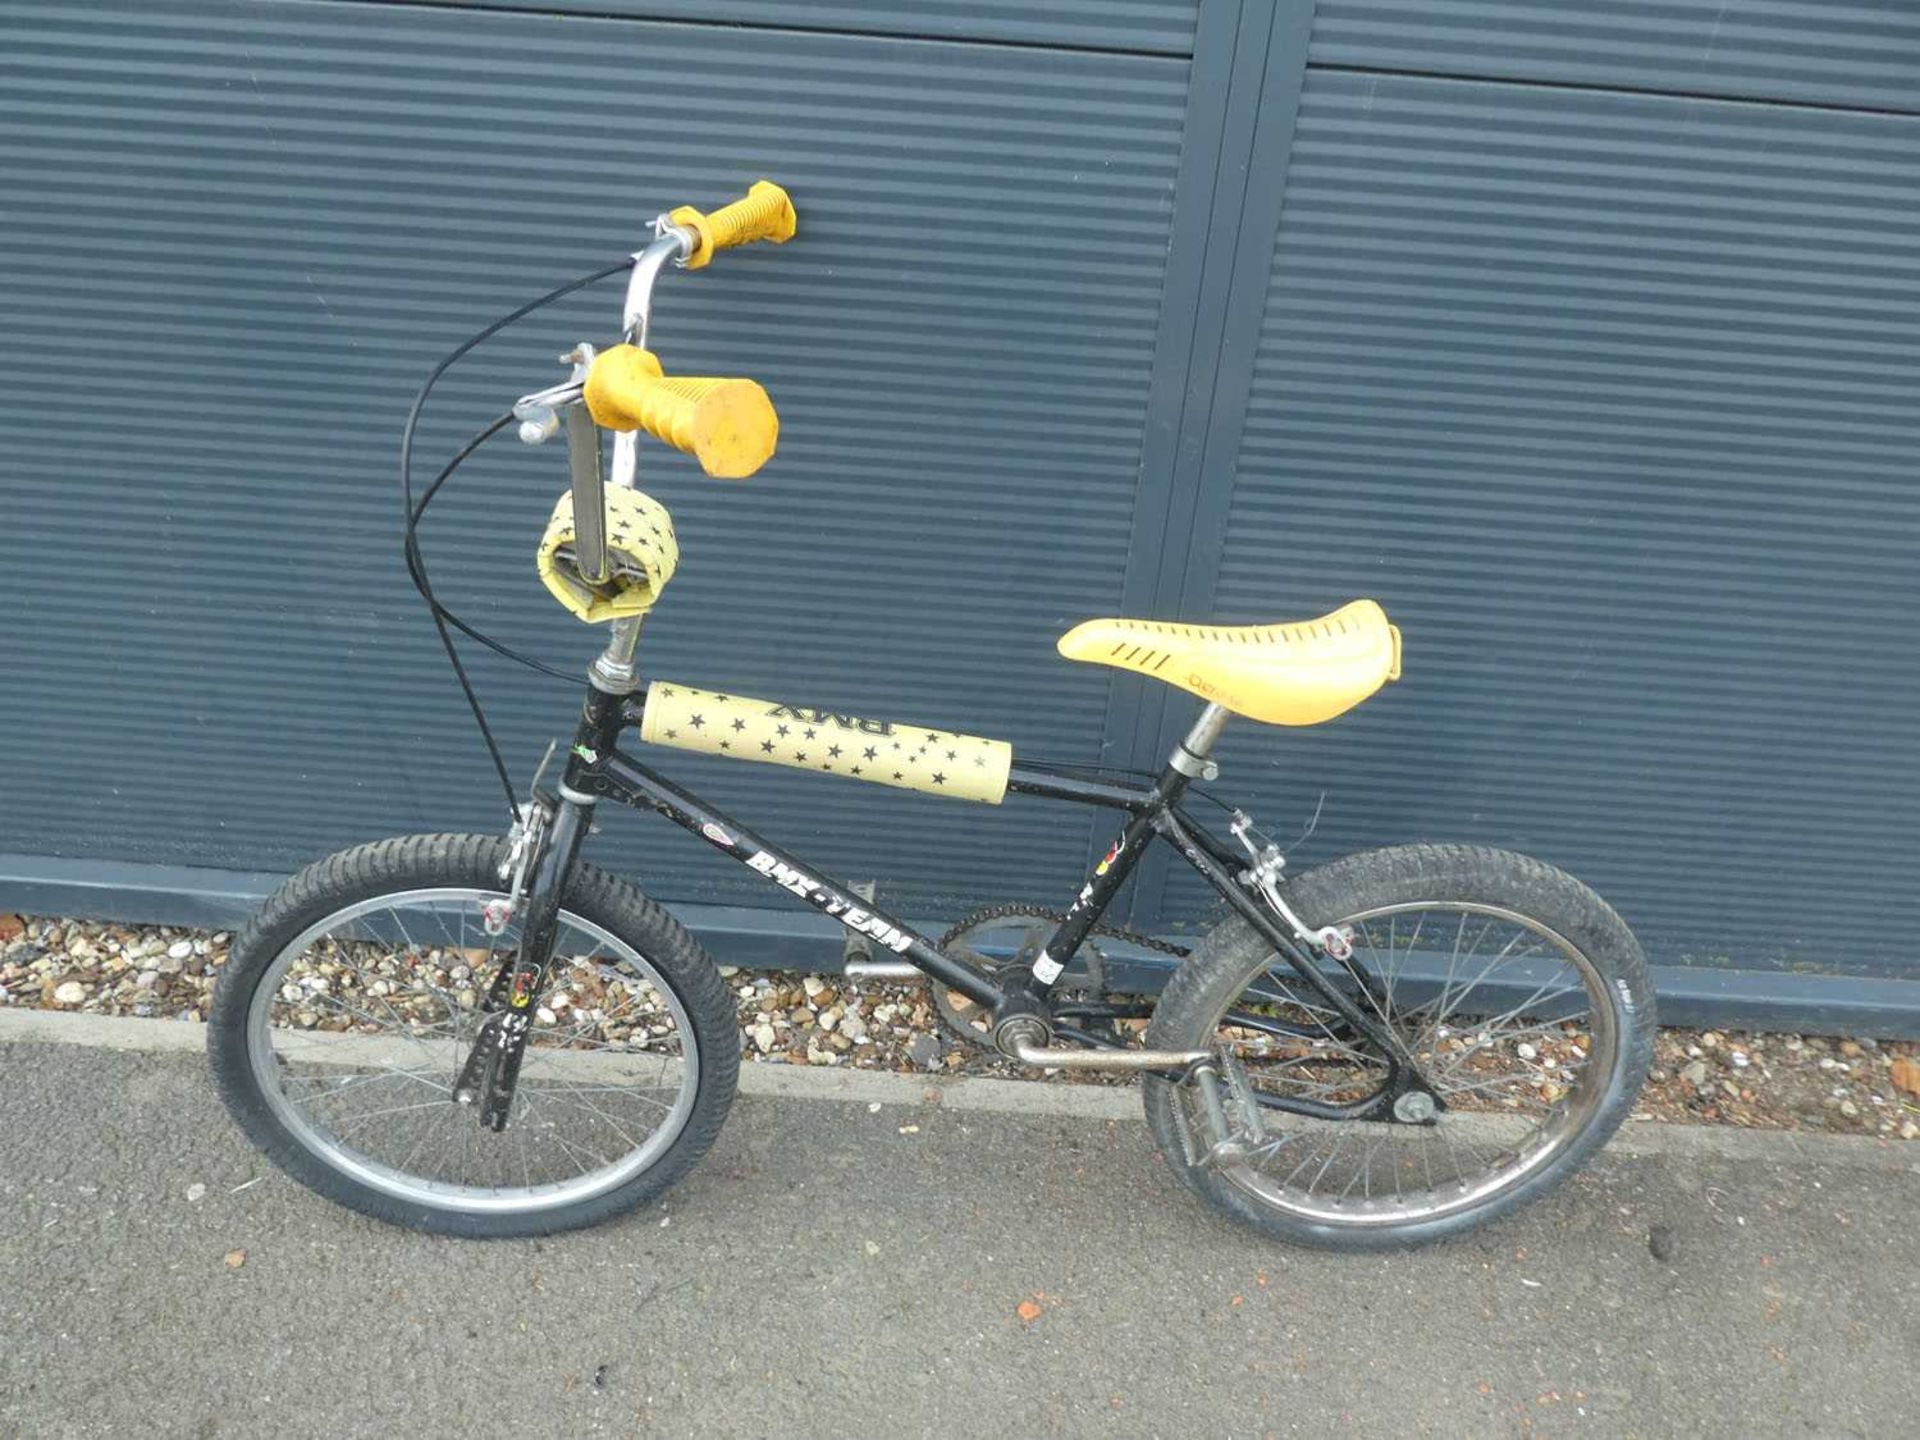 BMX cycle in black and yellow